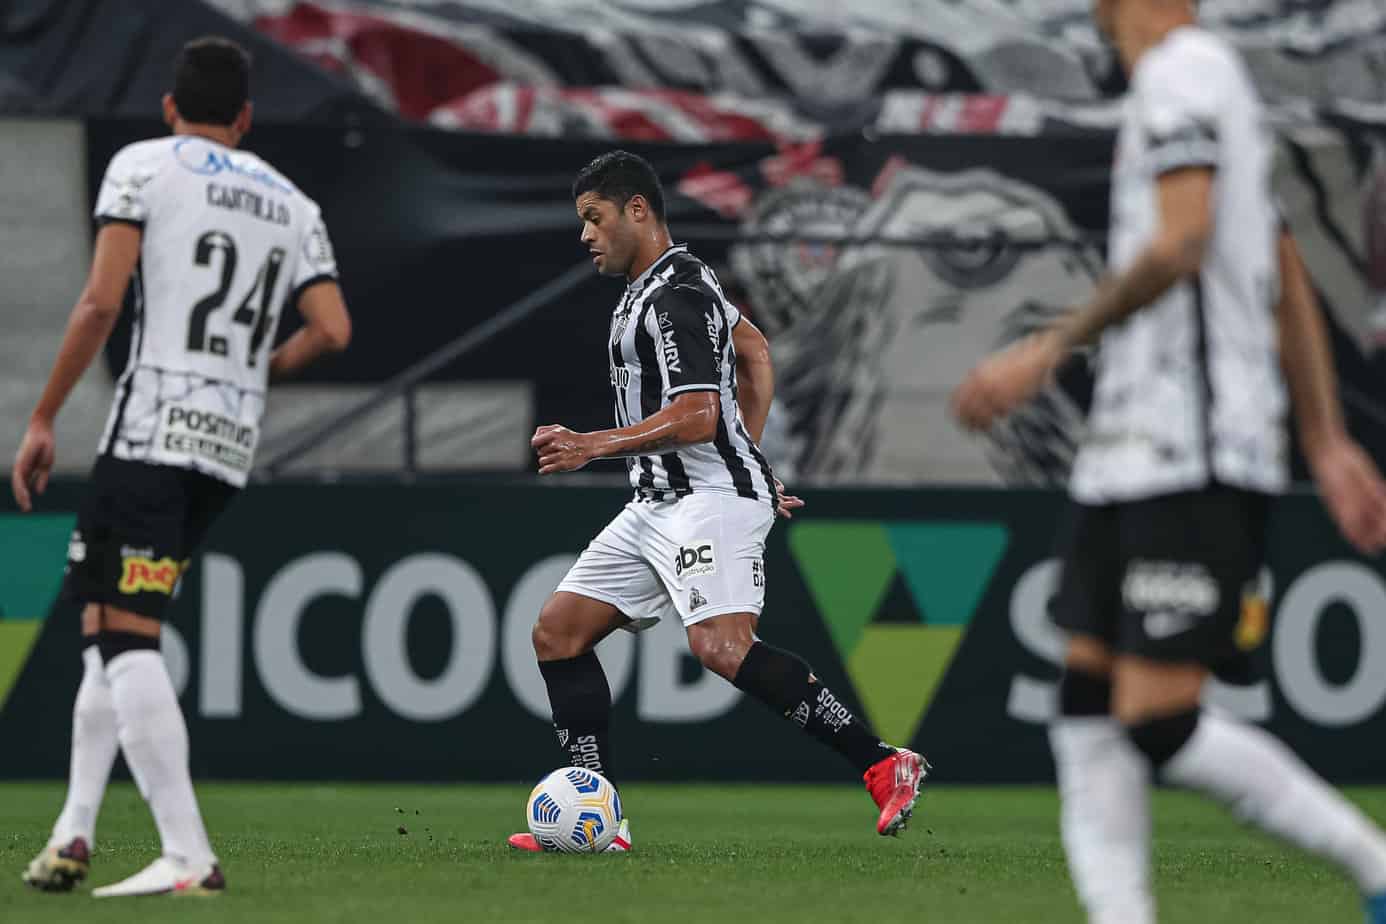 Ceará vs. Atlético Mineiro – Betting Odds and Free Pick